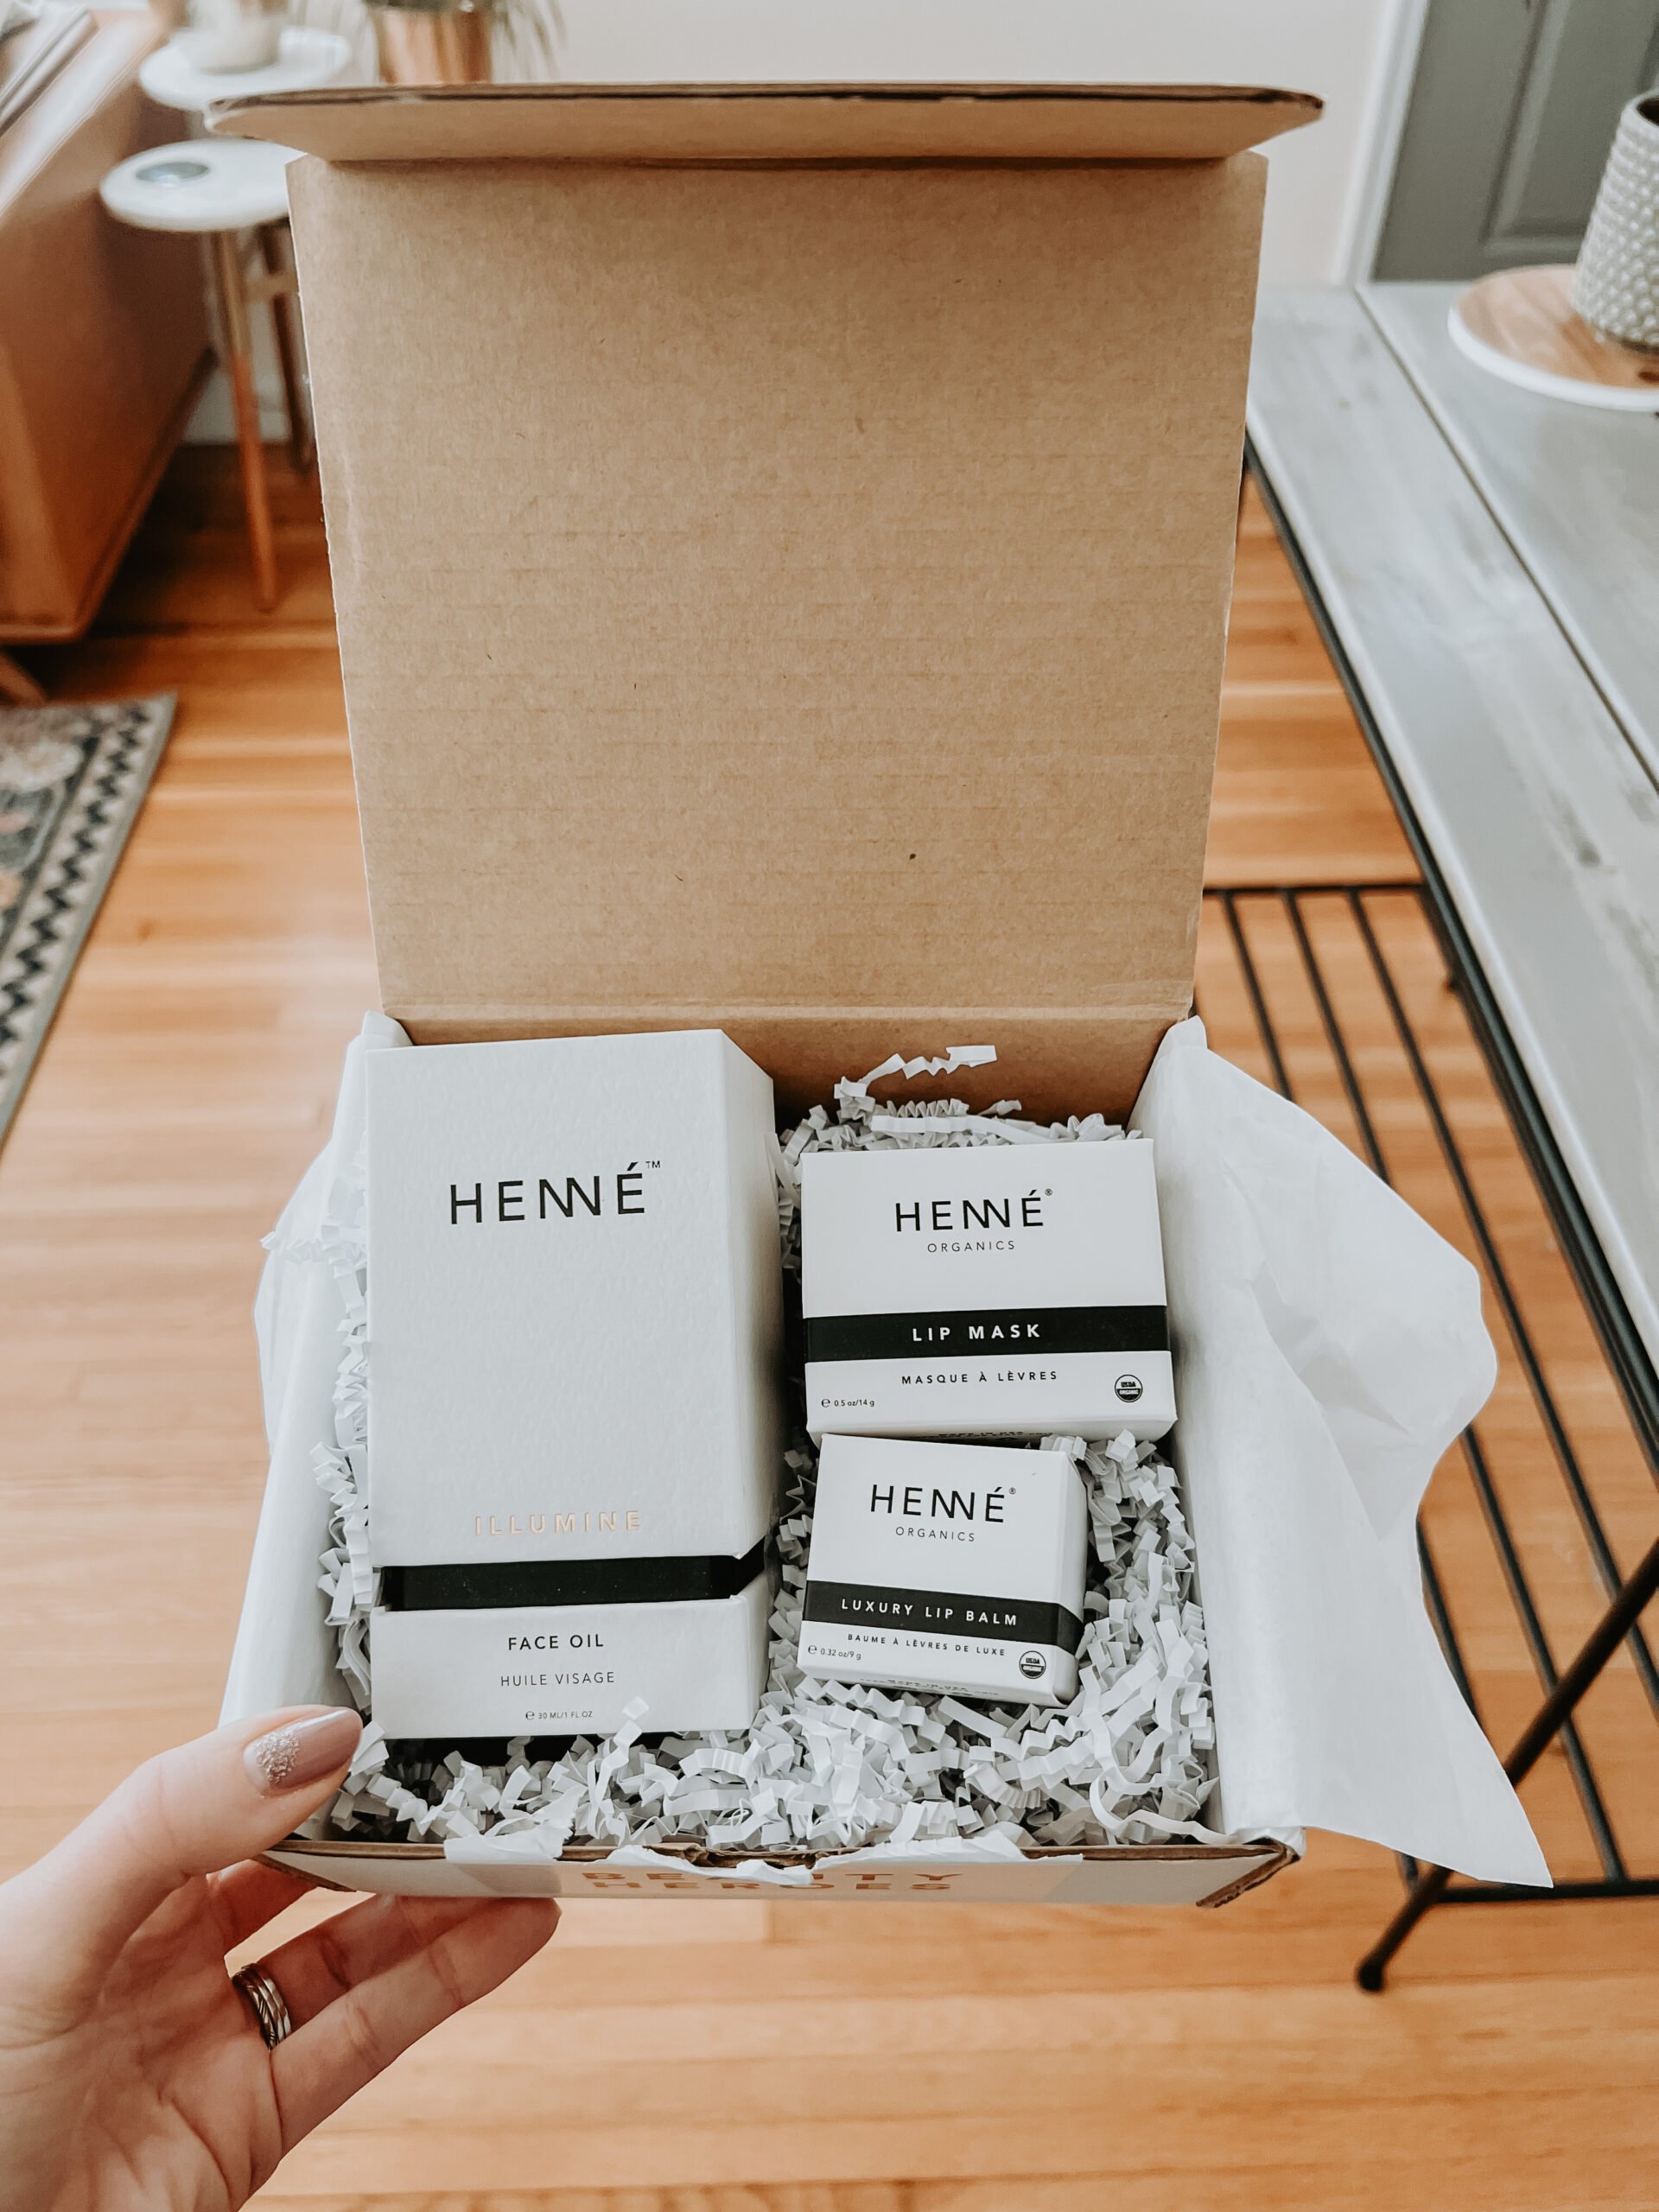 The March Beauty Heroes Box with Henne products.